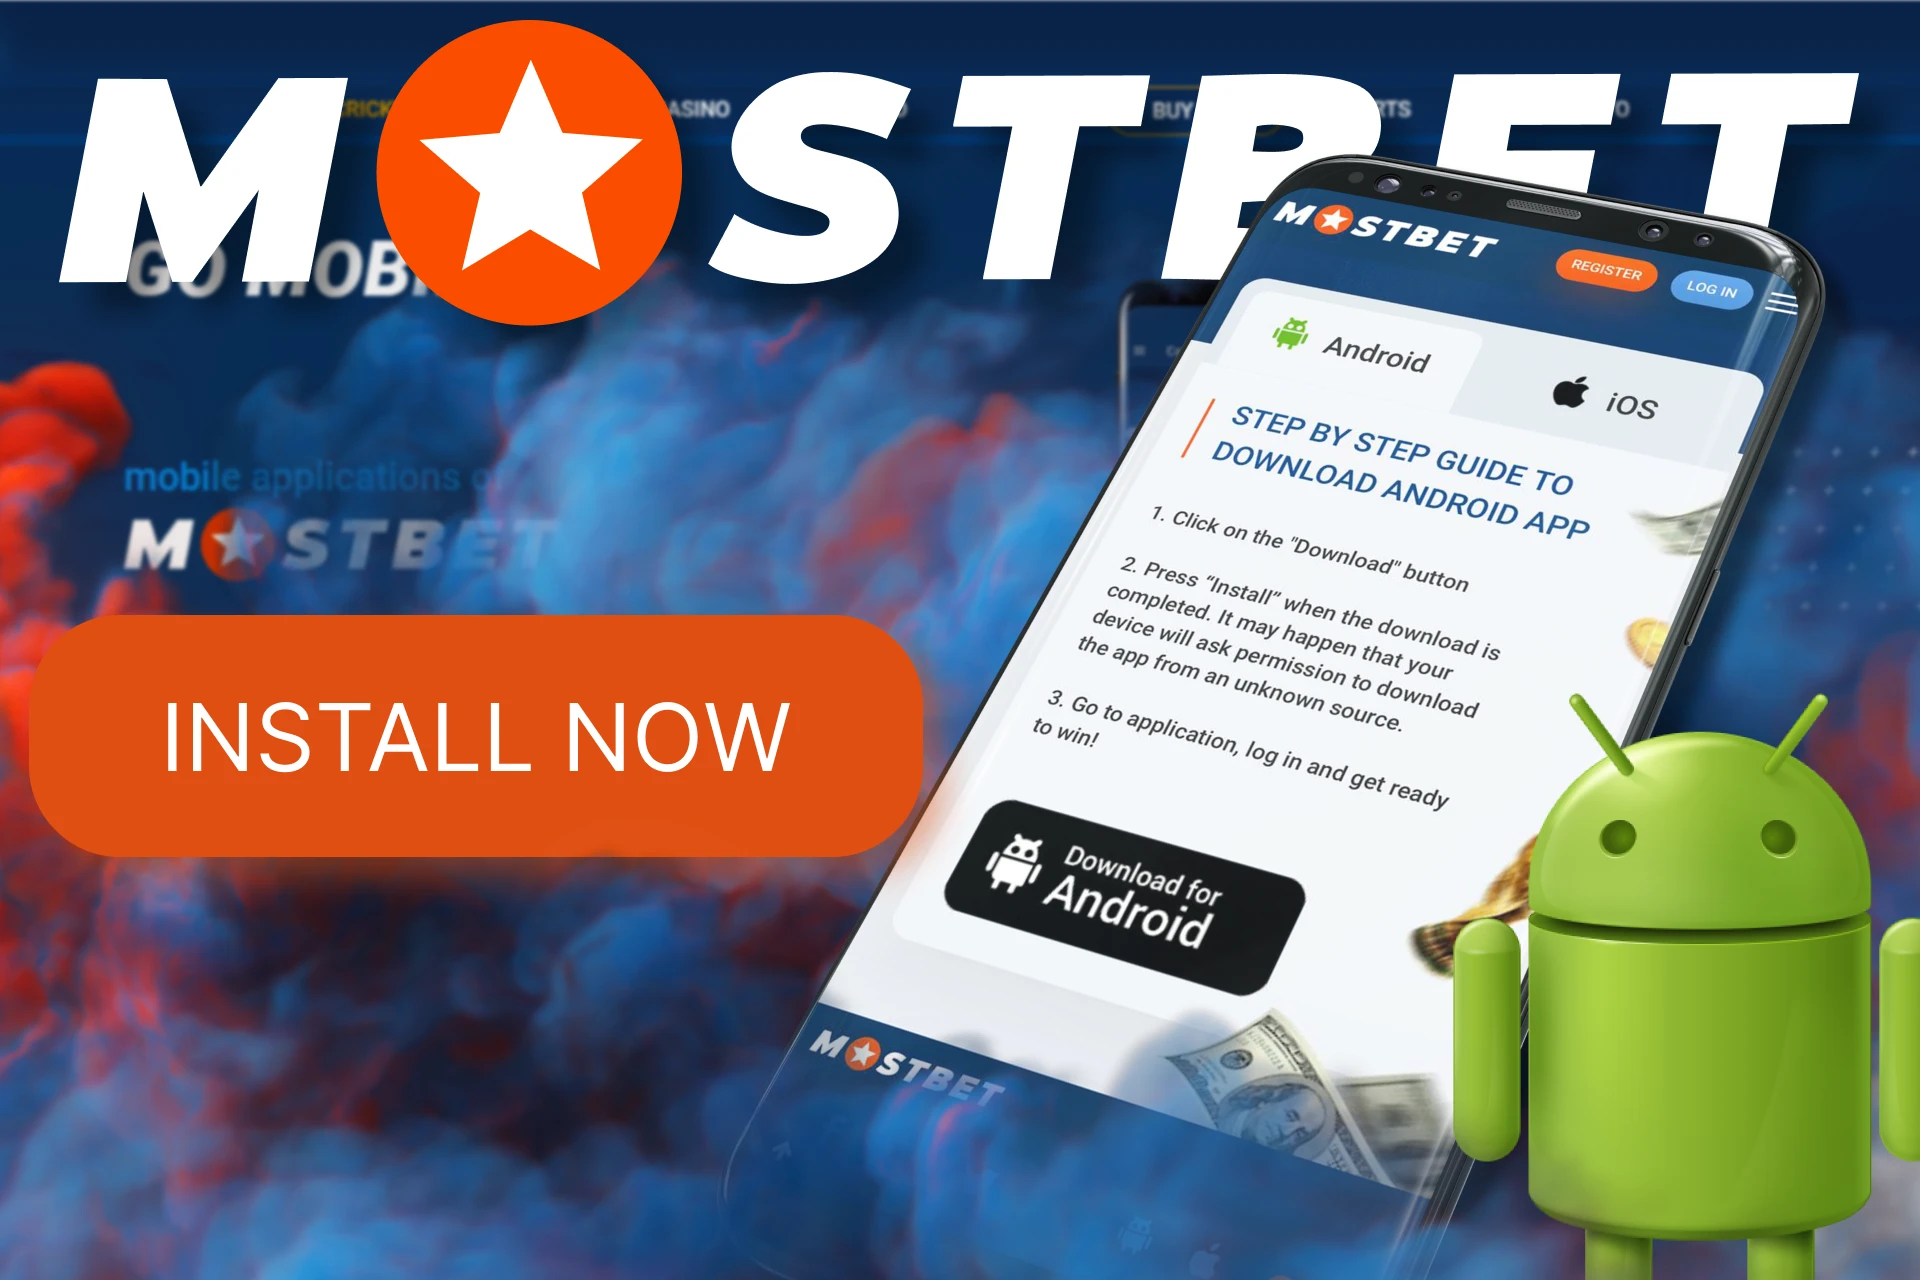 Install the Mostbet app easily with these instructions for Android.